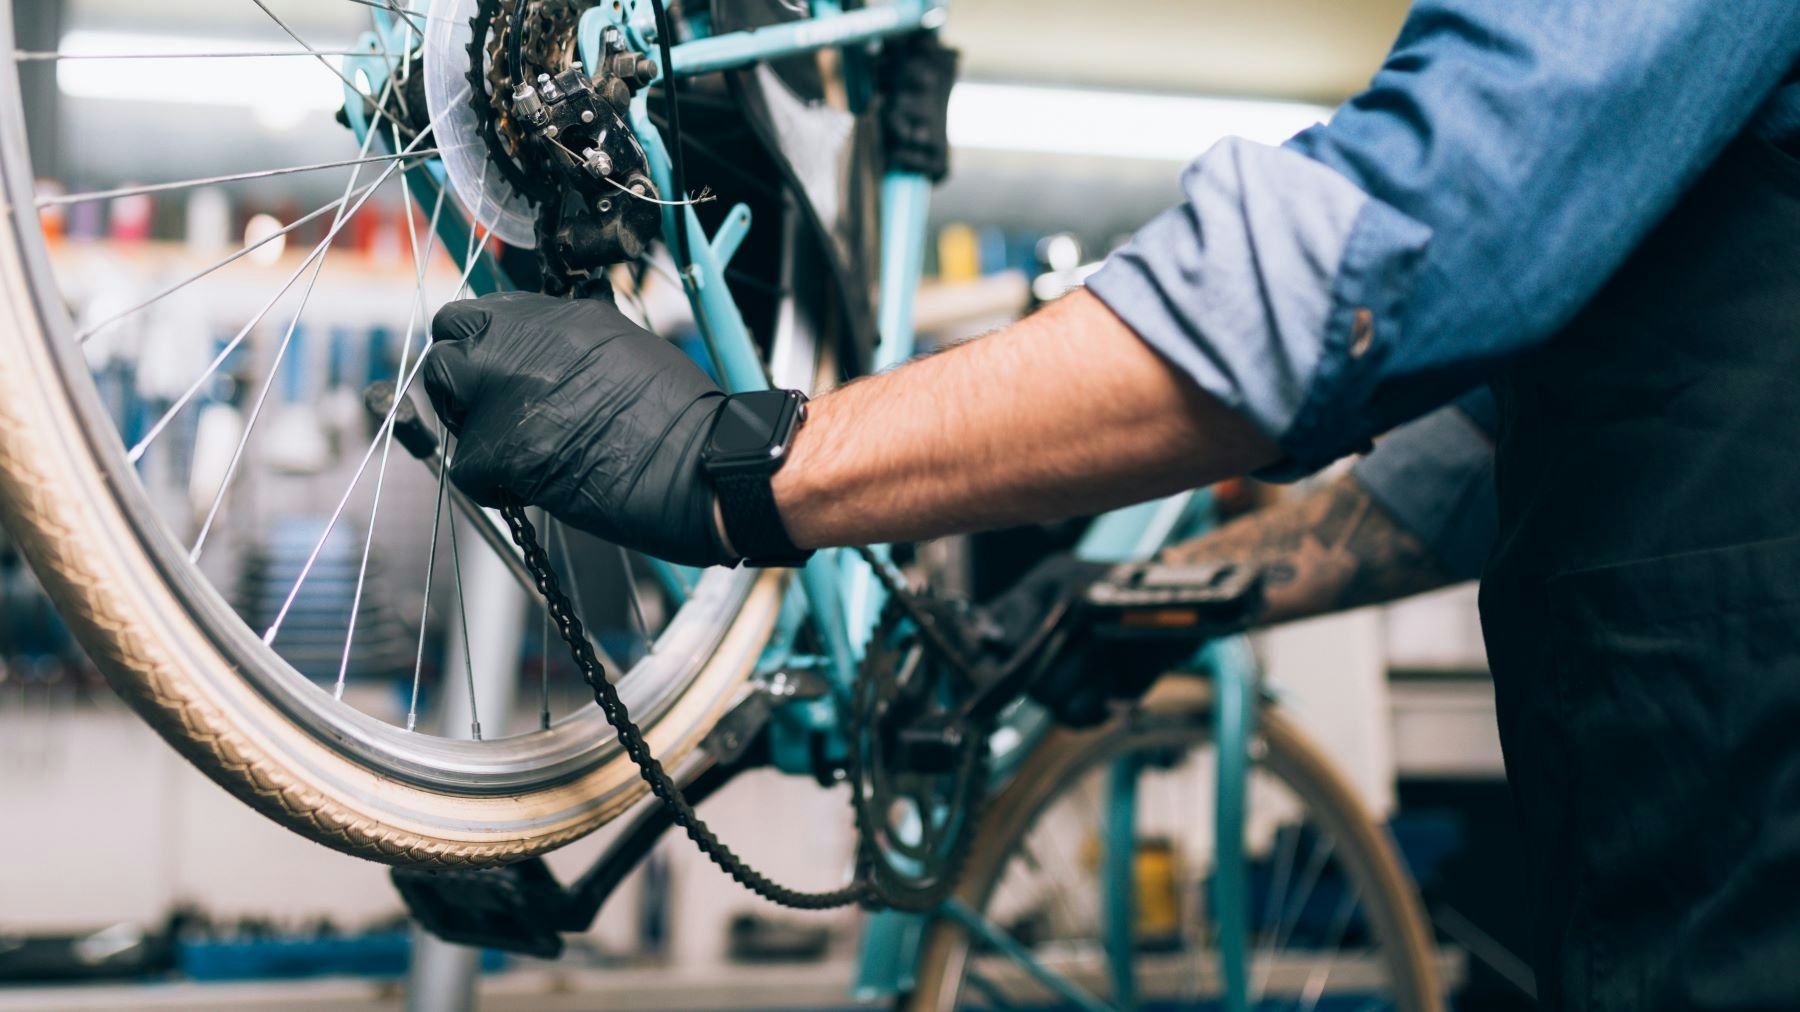 Producers of products which fall under the scope of the proposal – which includes bicycles - would be obliged to repair products even if they fall outside of the scope of a legal guarantee. - Photo Shutterstock